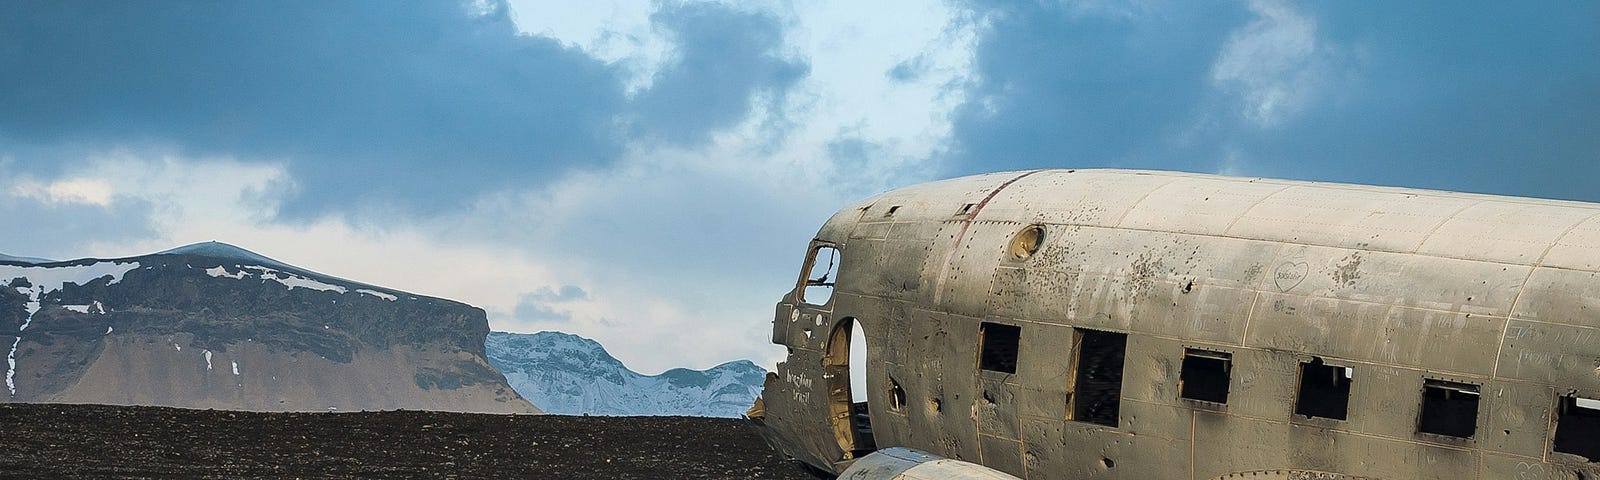 Carcasses of two old planes in a barren landscape